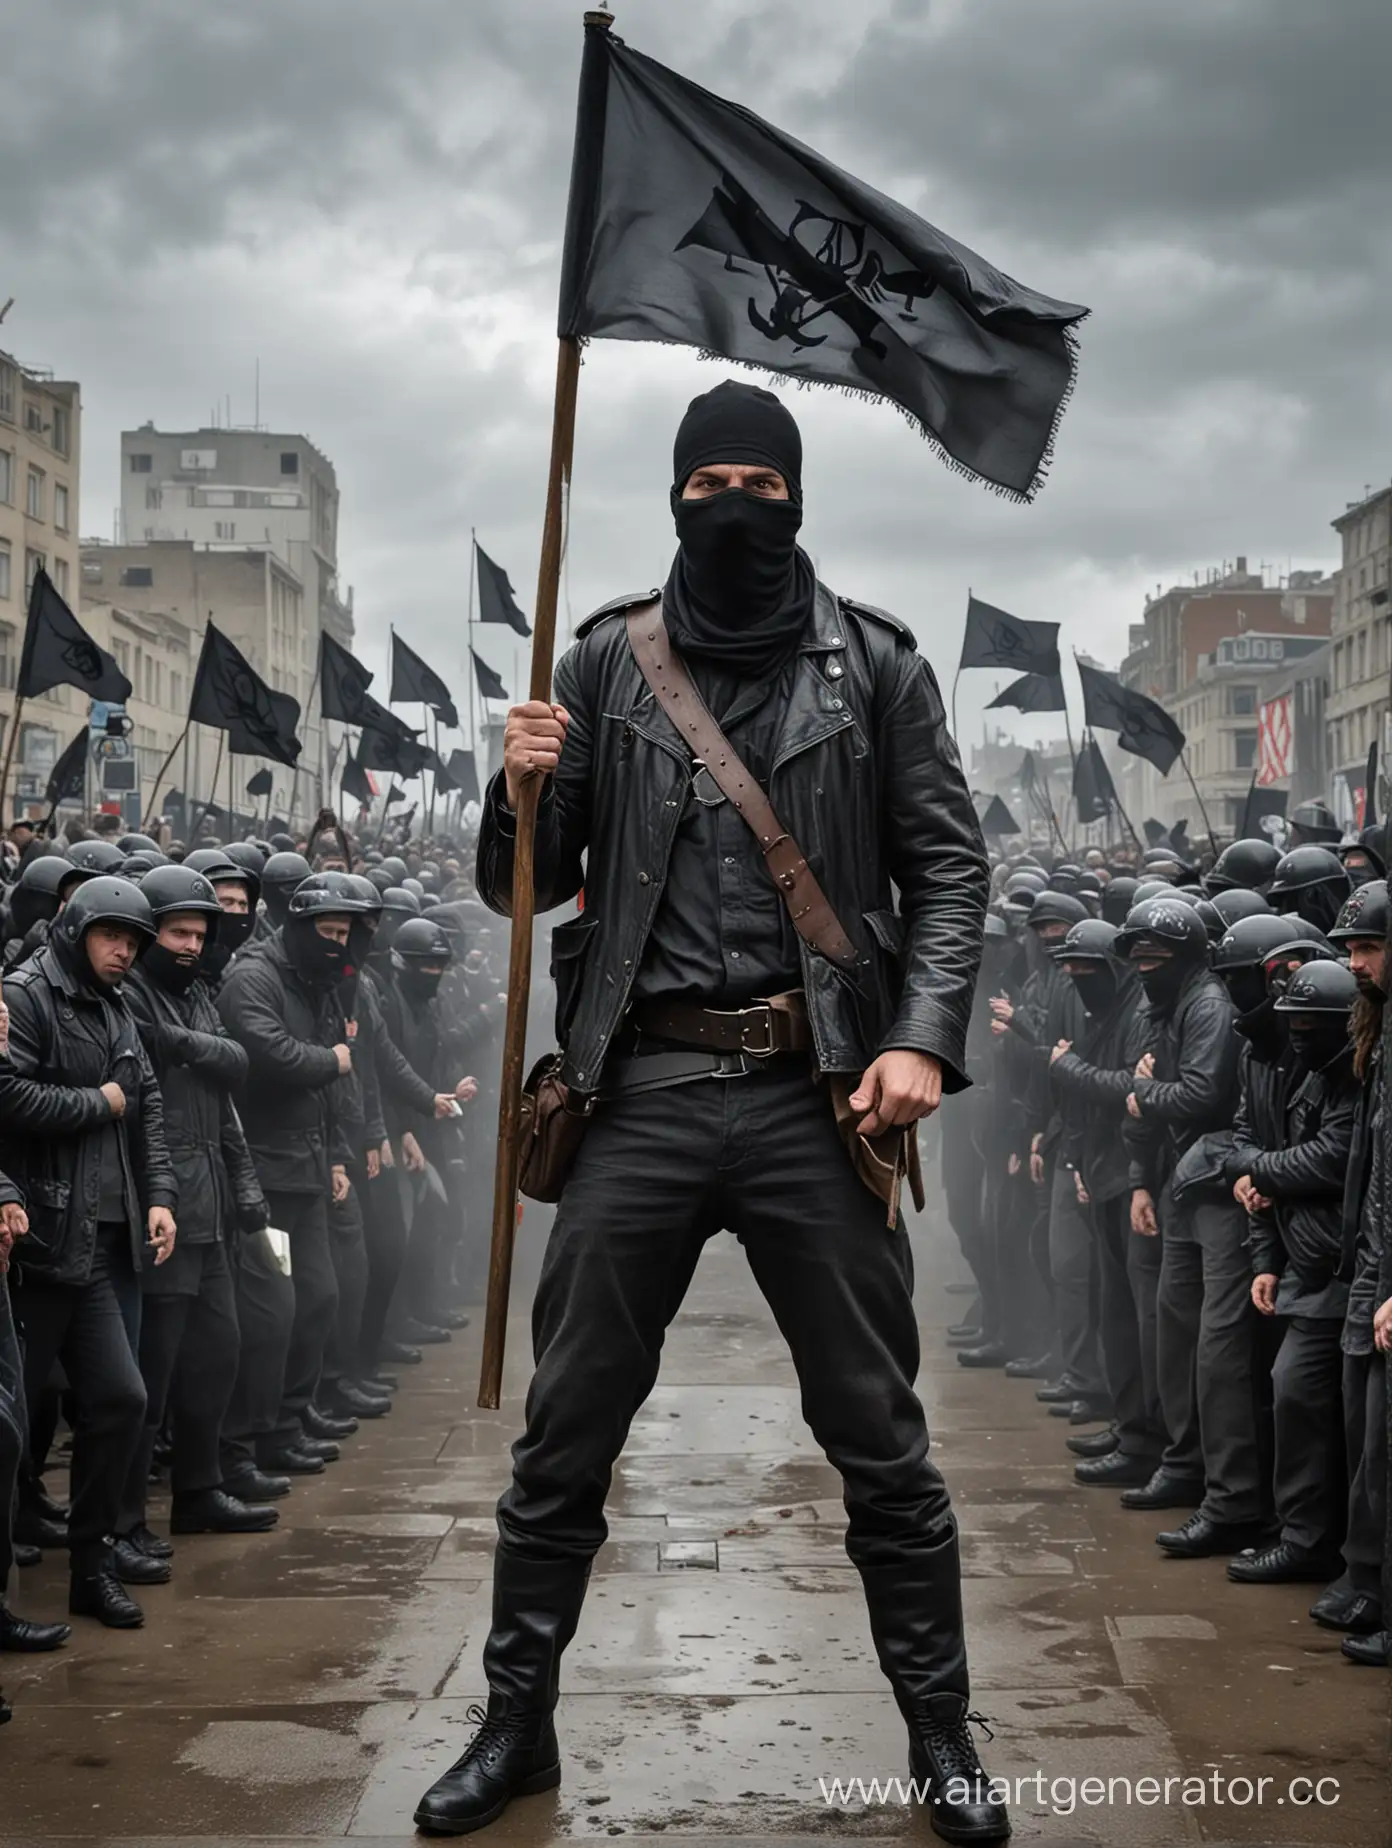 an anarchist in the crowd. the black flag. beats a policeman. Grey sky, rally,